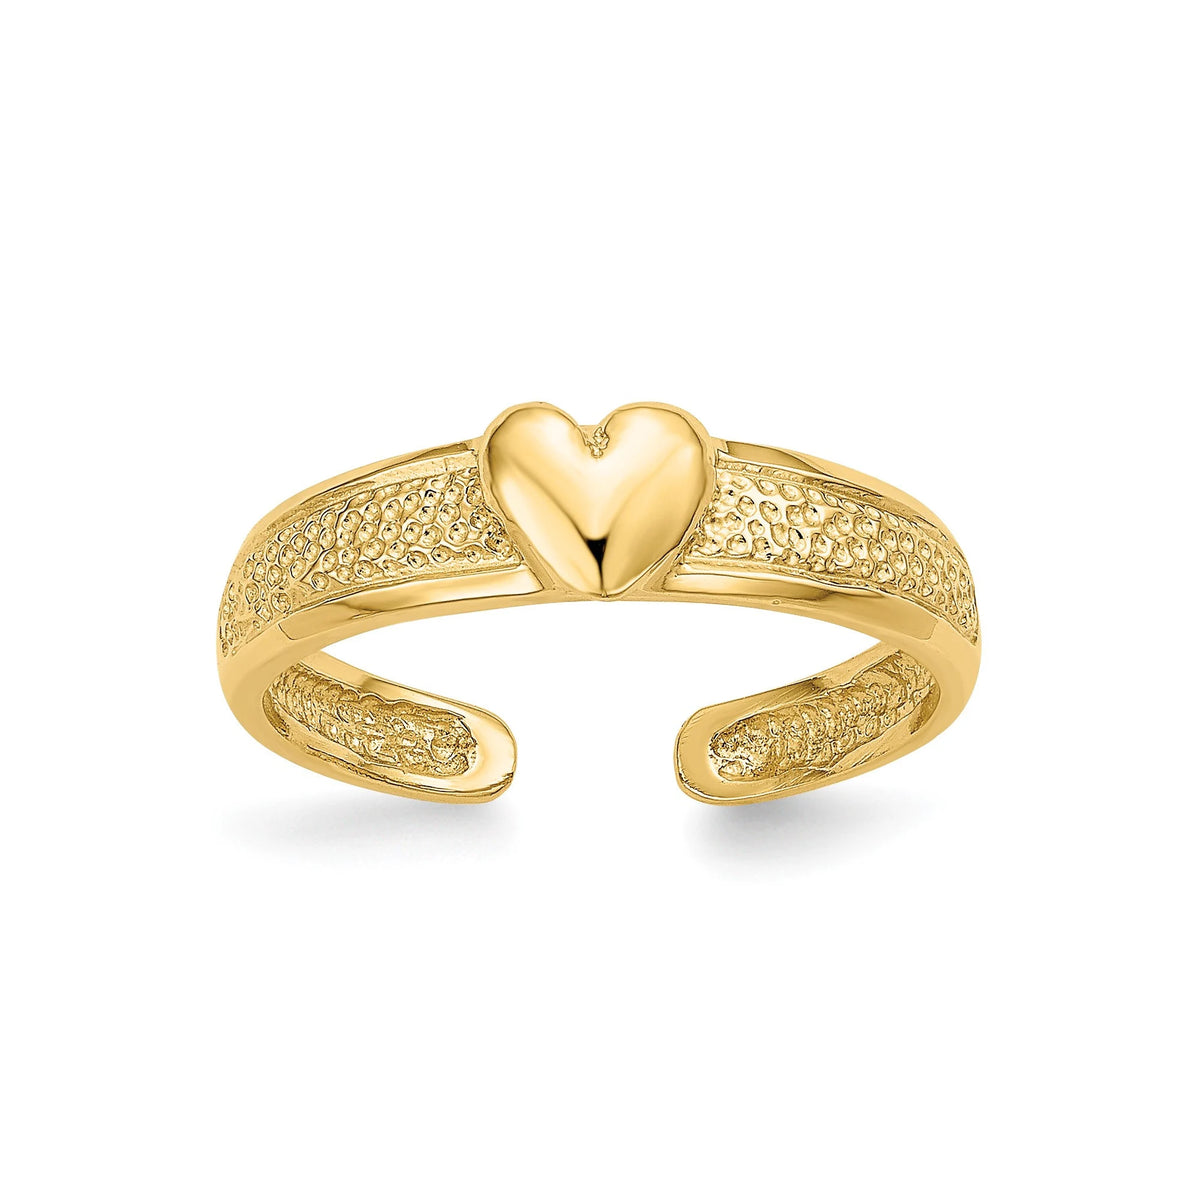 14k Yellow Gold Puff Heart Adjustable Toe Ring 4 to 5mm - Gift Box Included - Made in USA